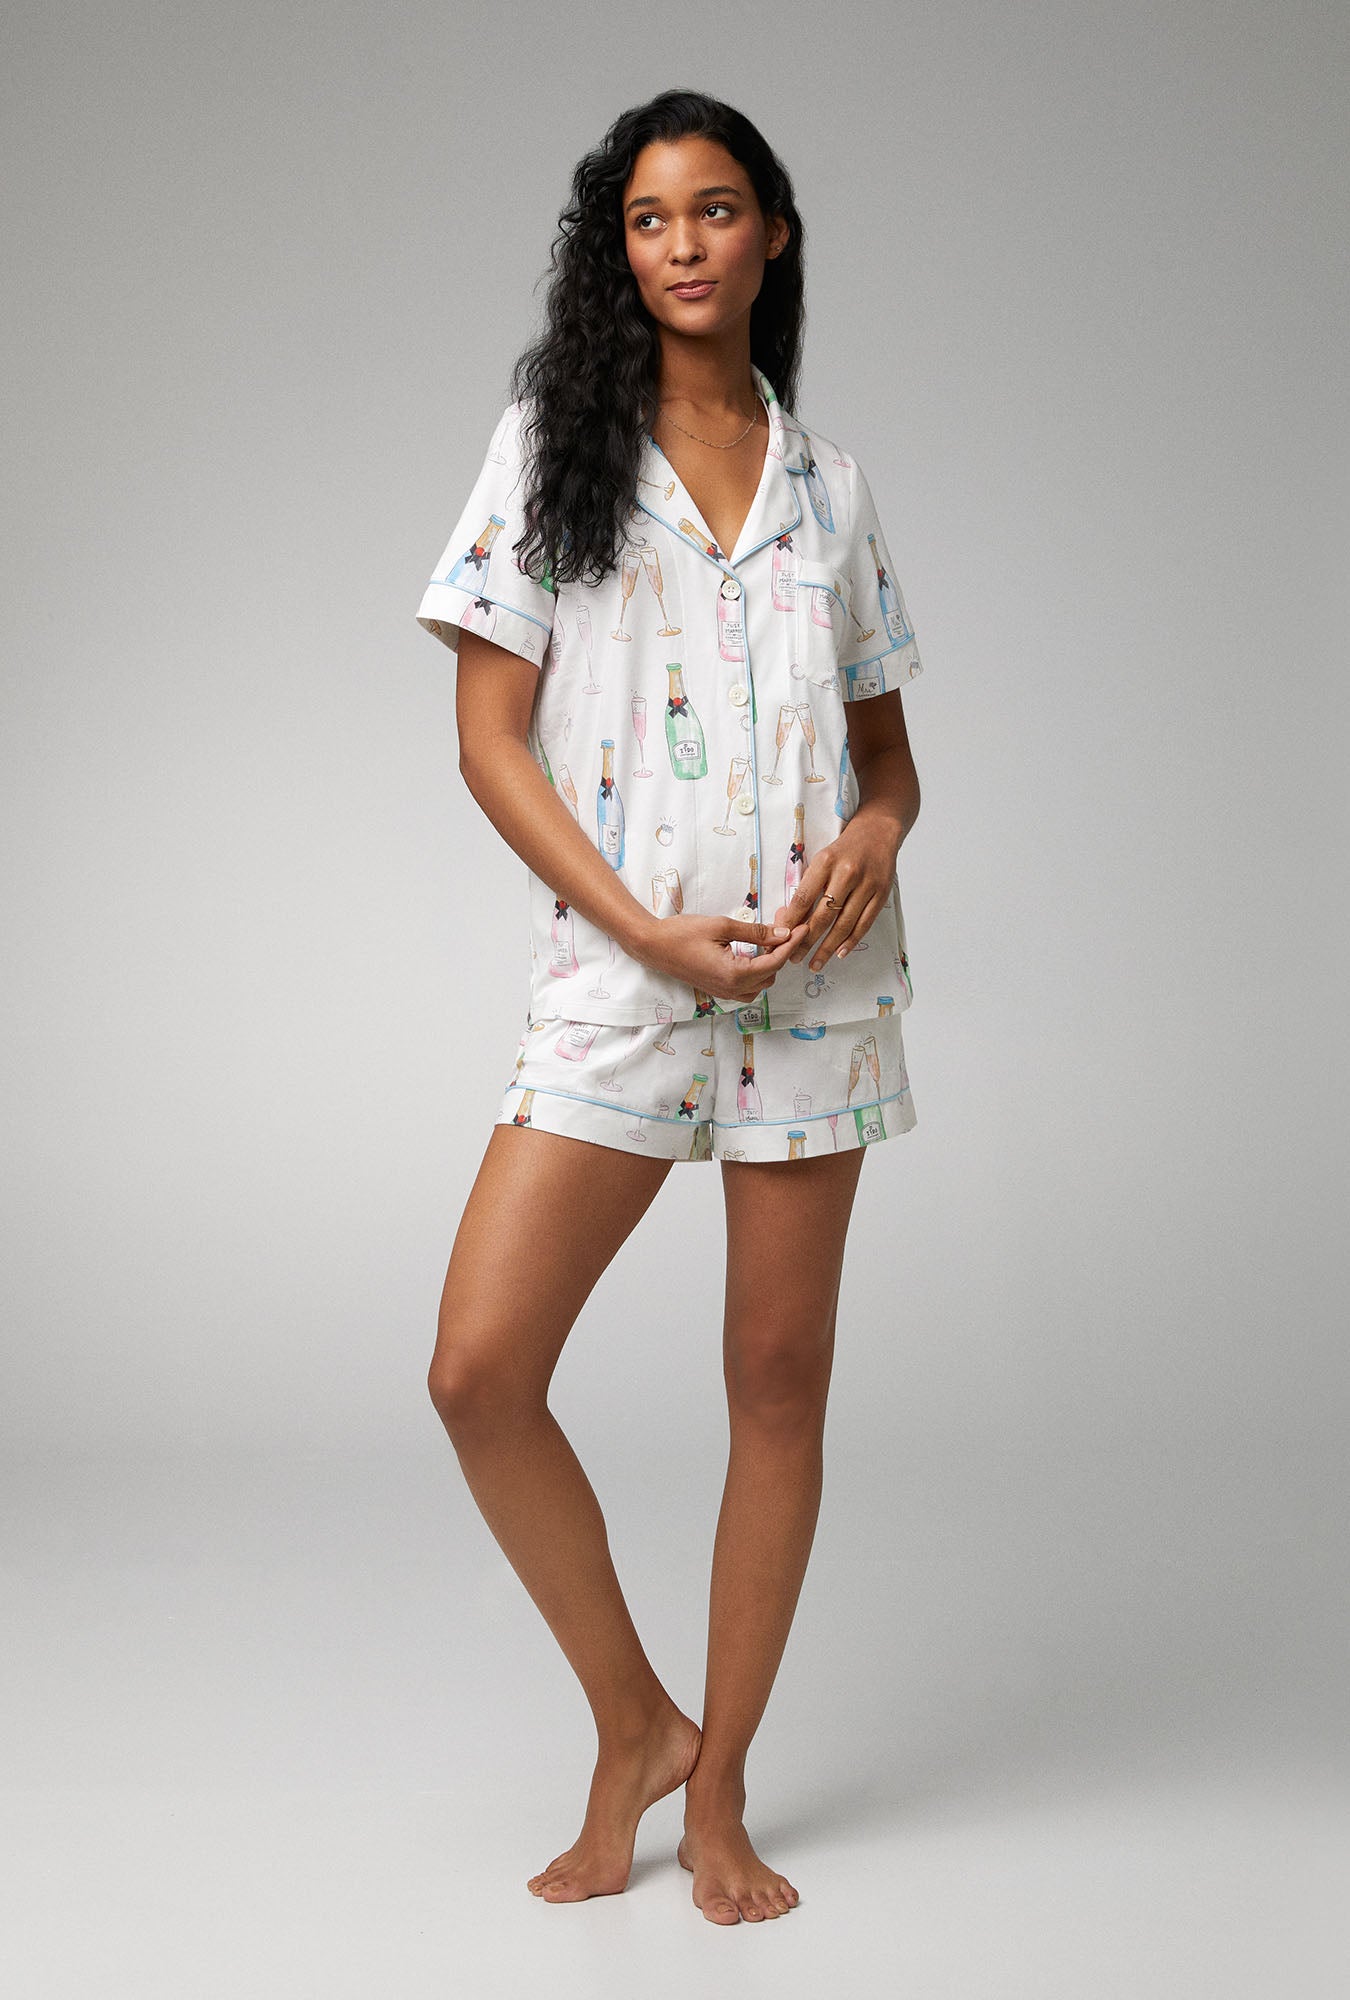 A lady wearing Short Sleeve Classic Shorty Stretch Jersey PJ Set with Champagne Wedding print